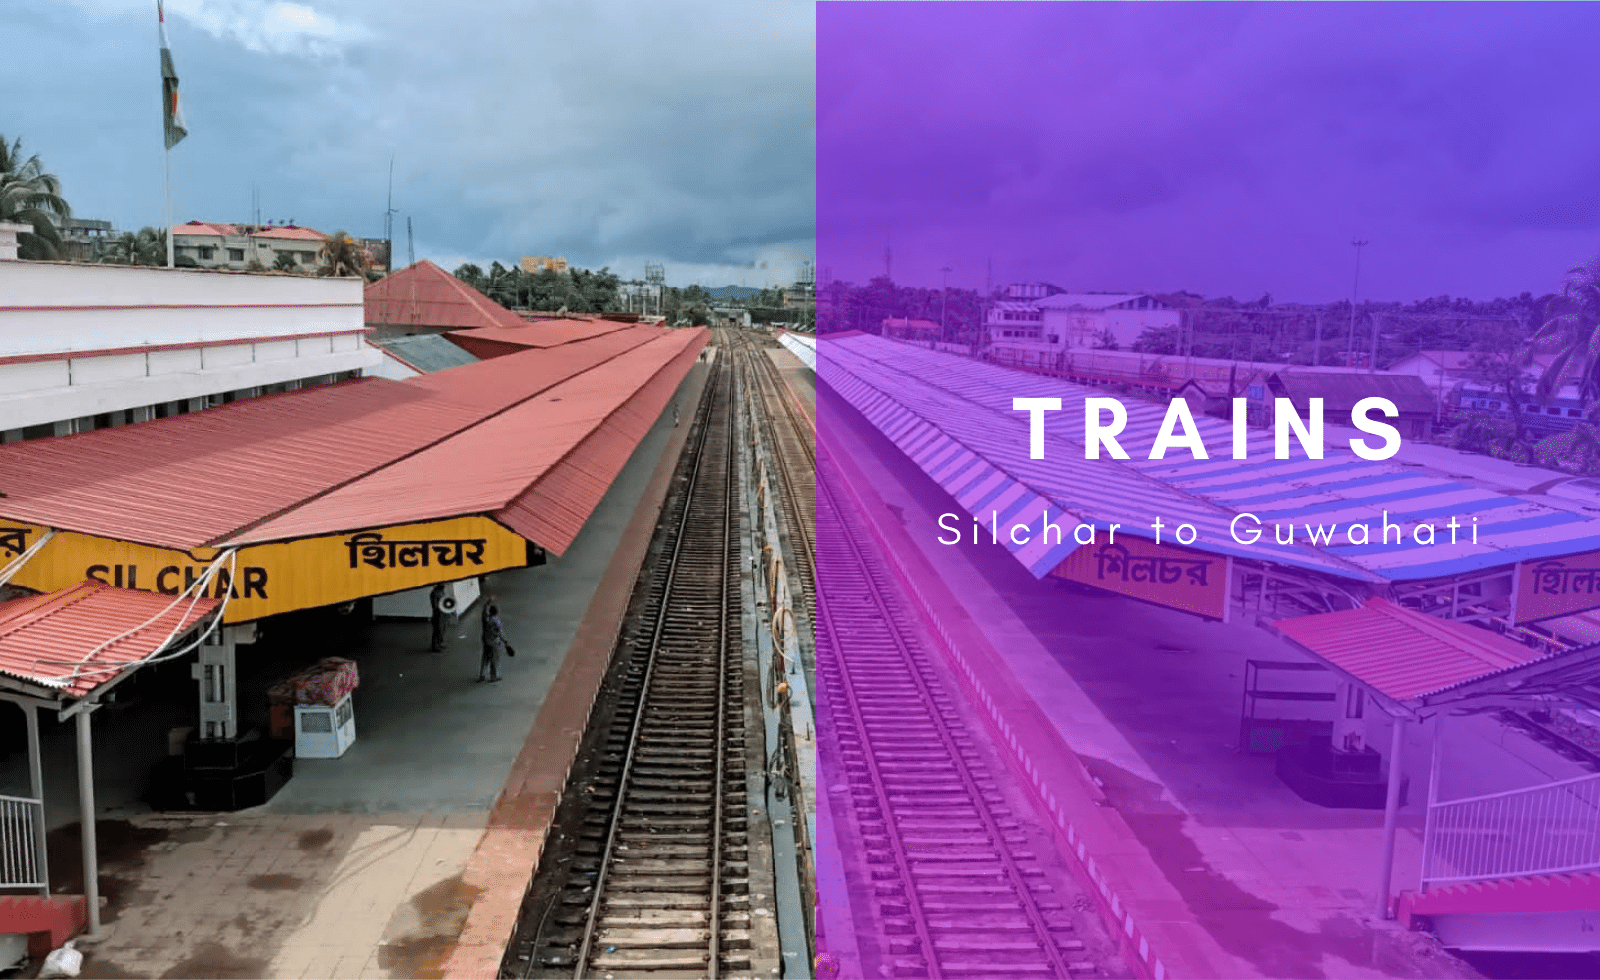 Trains from Silchar to Guwahati